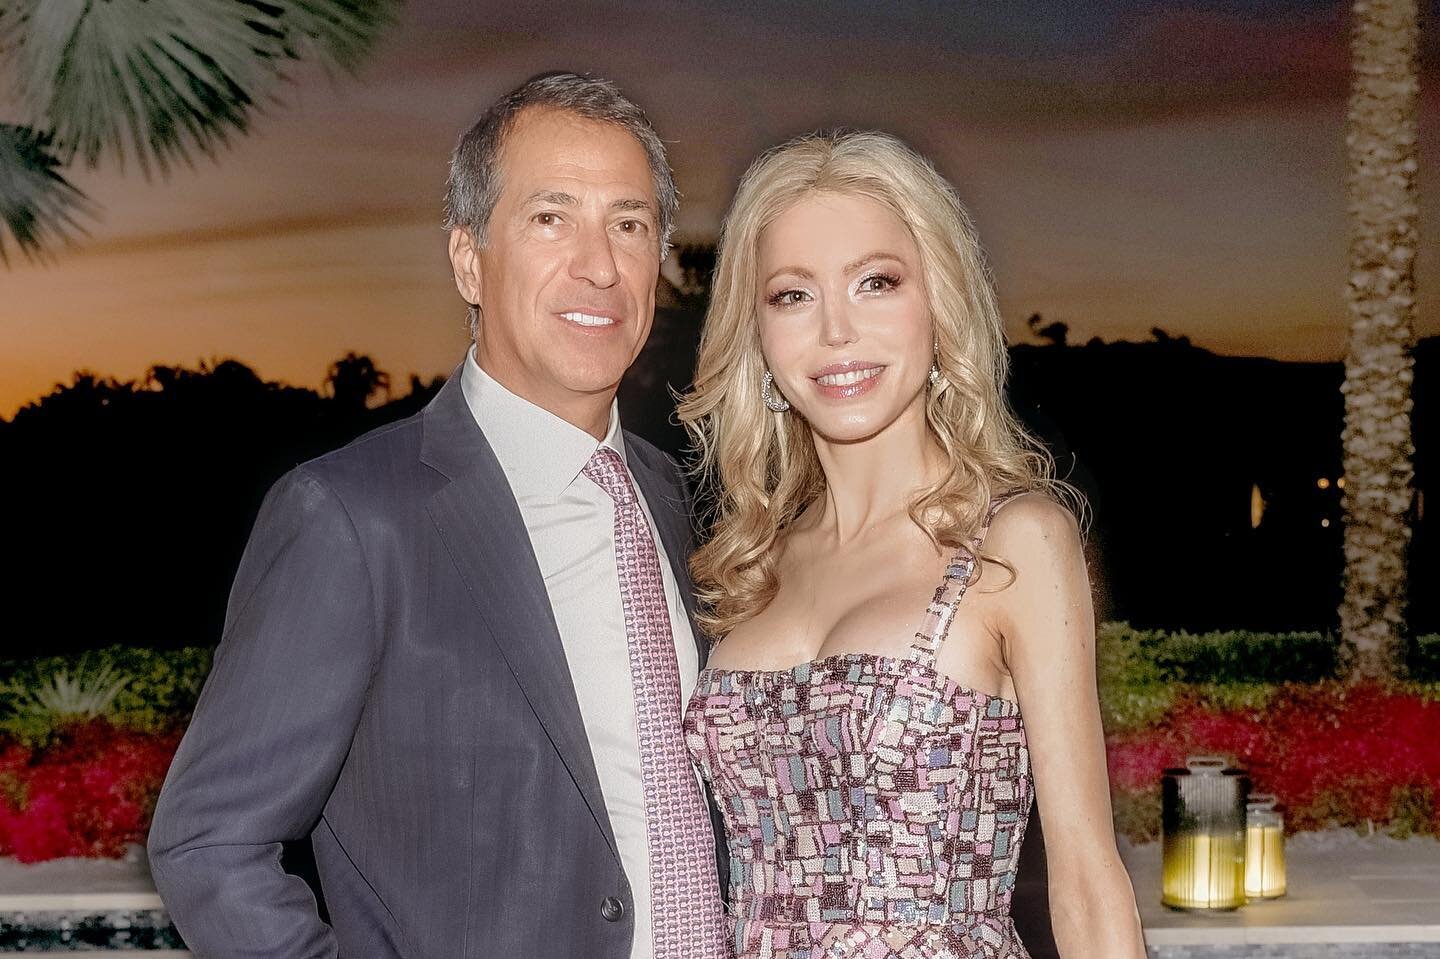 Executive director and award-winning actress Julianne Michelle and private equity CEO Marc Leder of Sun Capital hosted a gala on January 18, 2023 to benefit Mommy&rsquo;s Heart, a 501(C)3 supporting victims of abuse, with Oscar-winning board member C